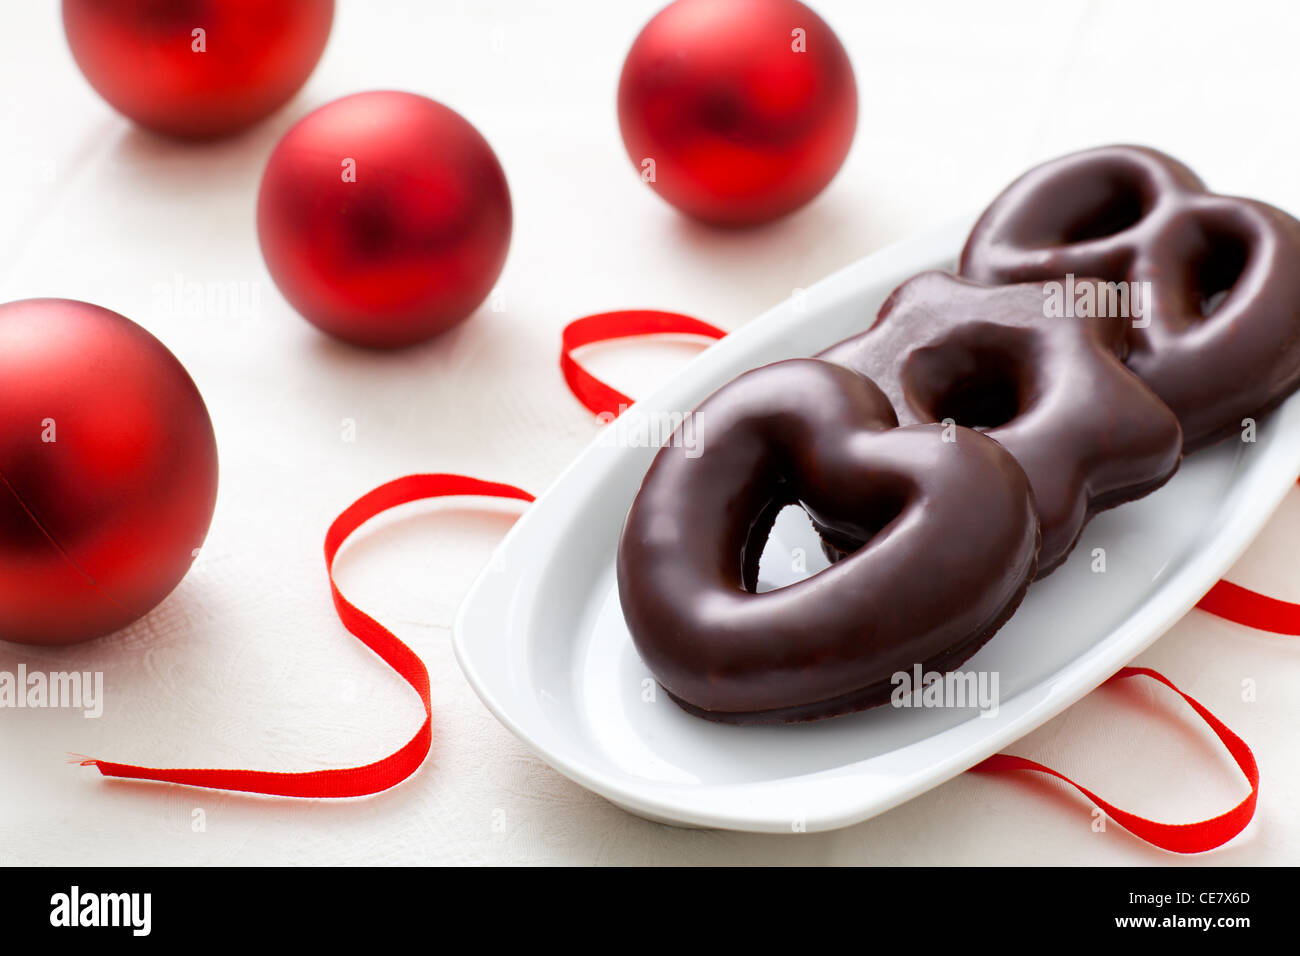 Lebkuchen, a Traditional German Christmas Cake, with Red Baubles Stock Photo